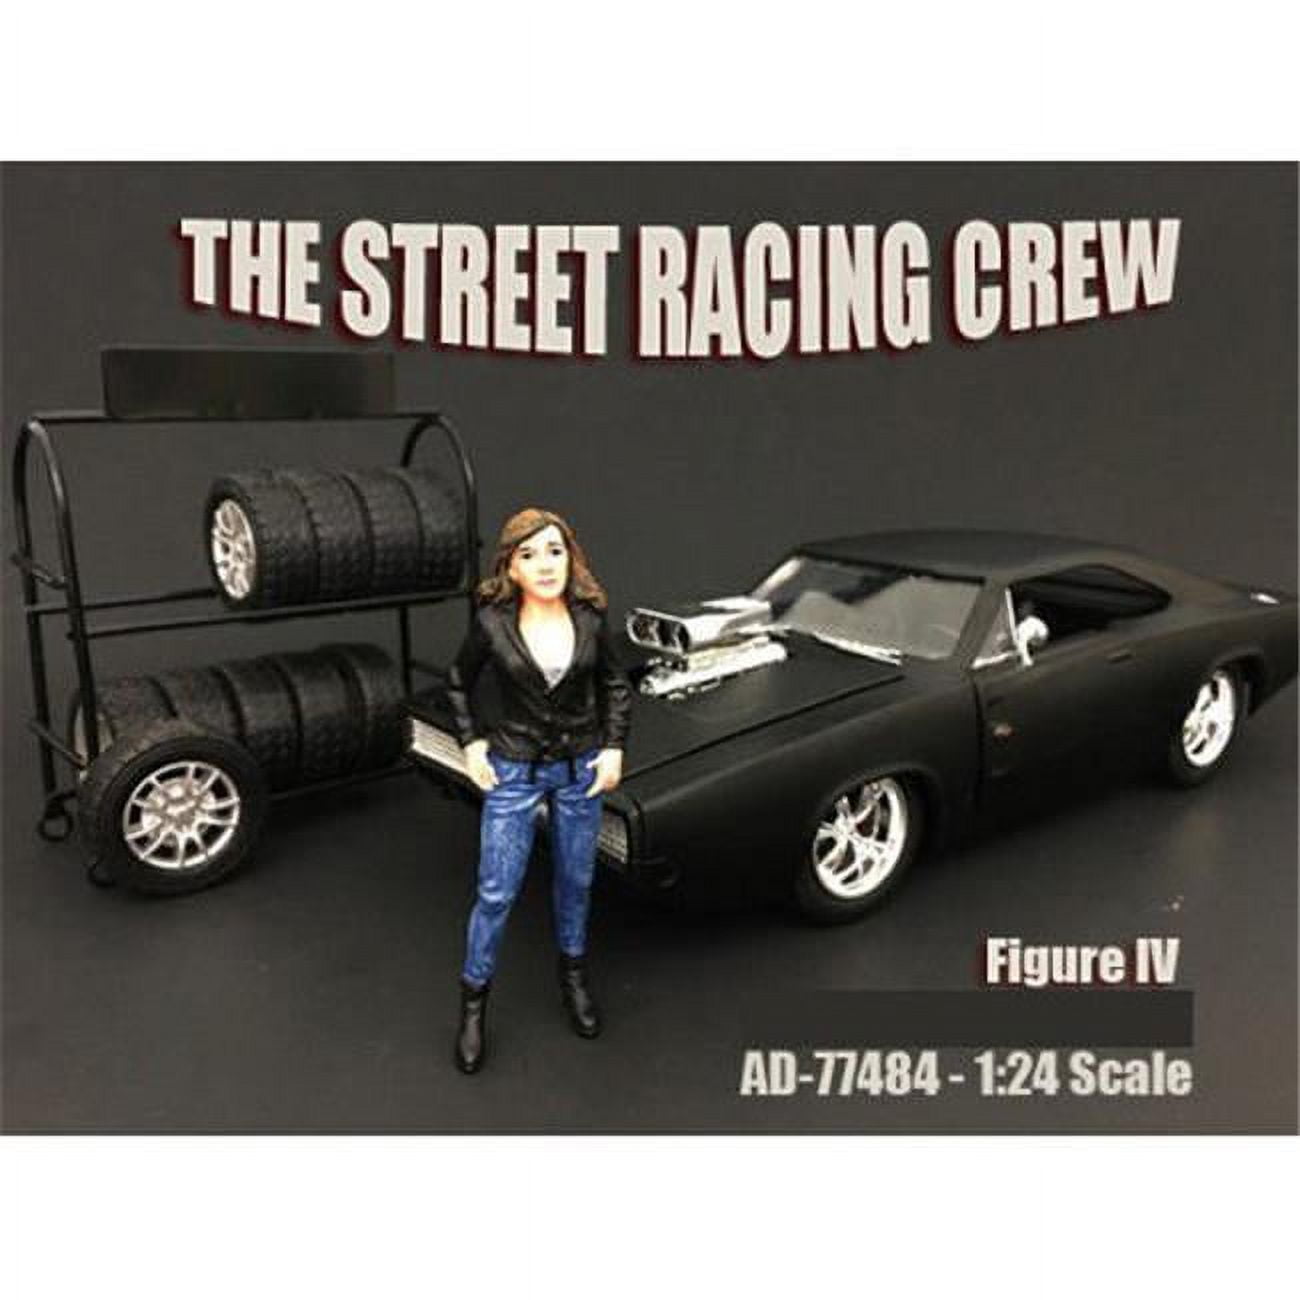 77484 The Street Racing Crew Figure Iv For 1-24 Scale Models